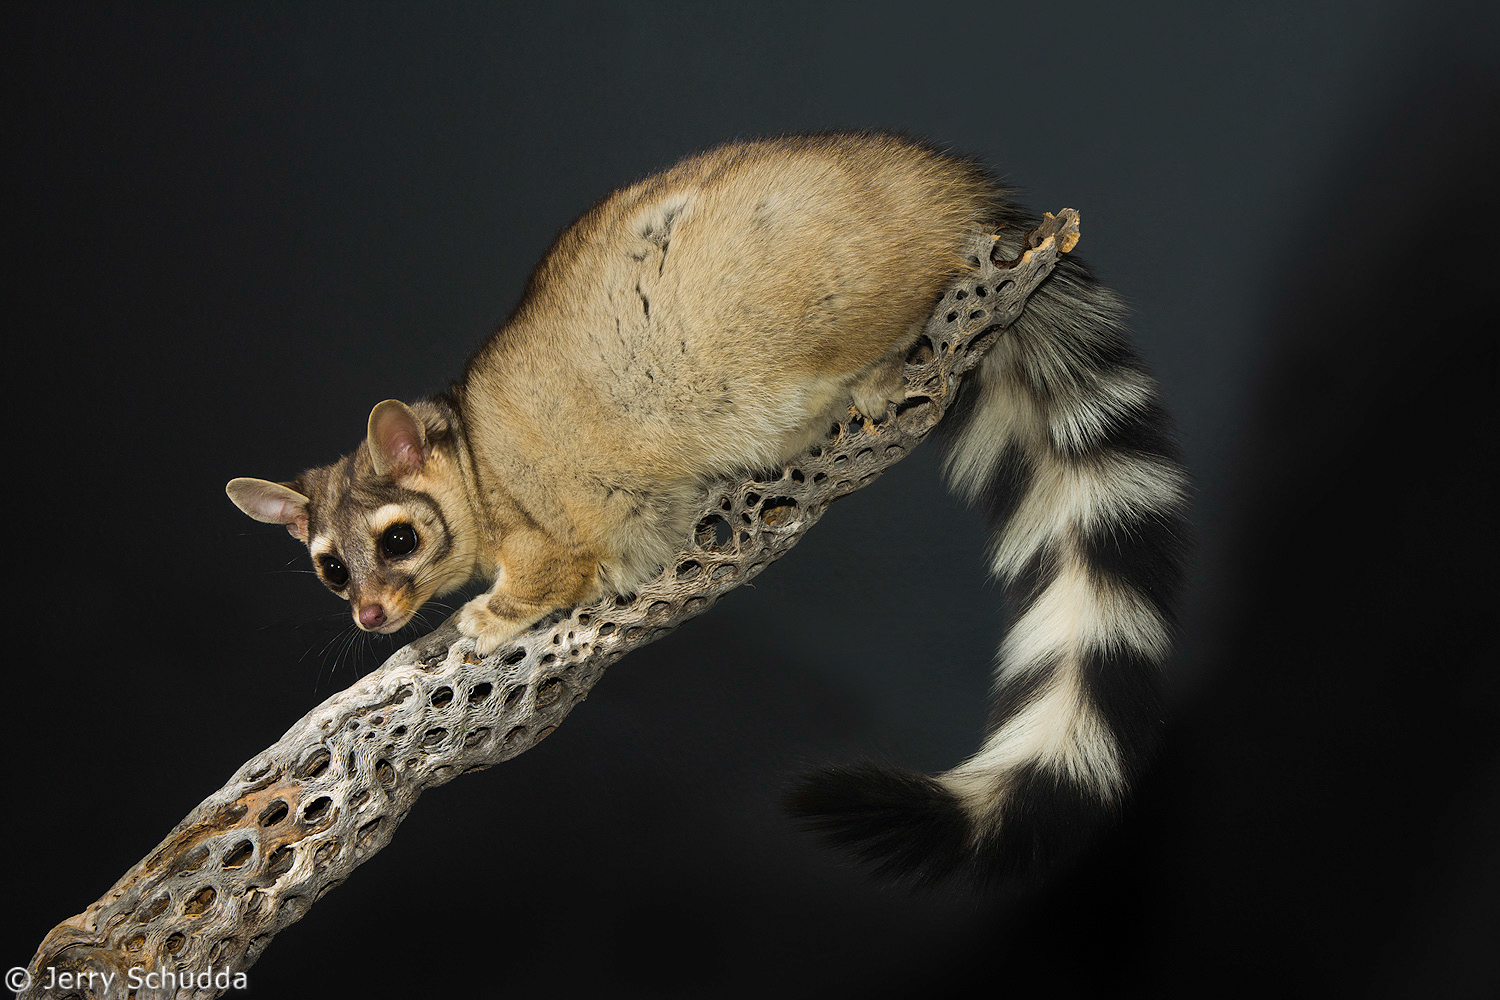 Ringtail subcategory           